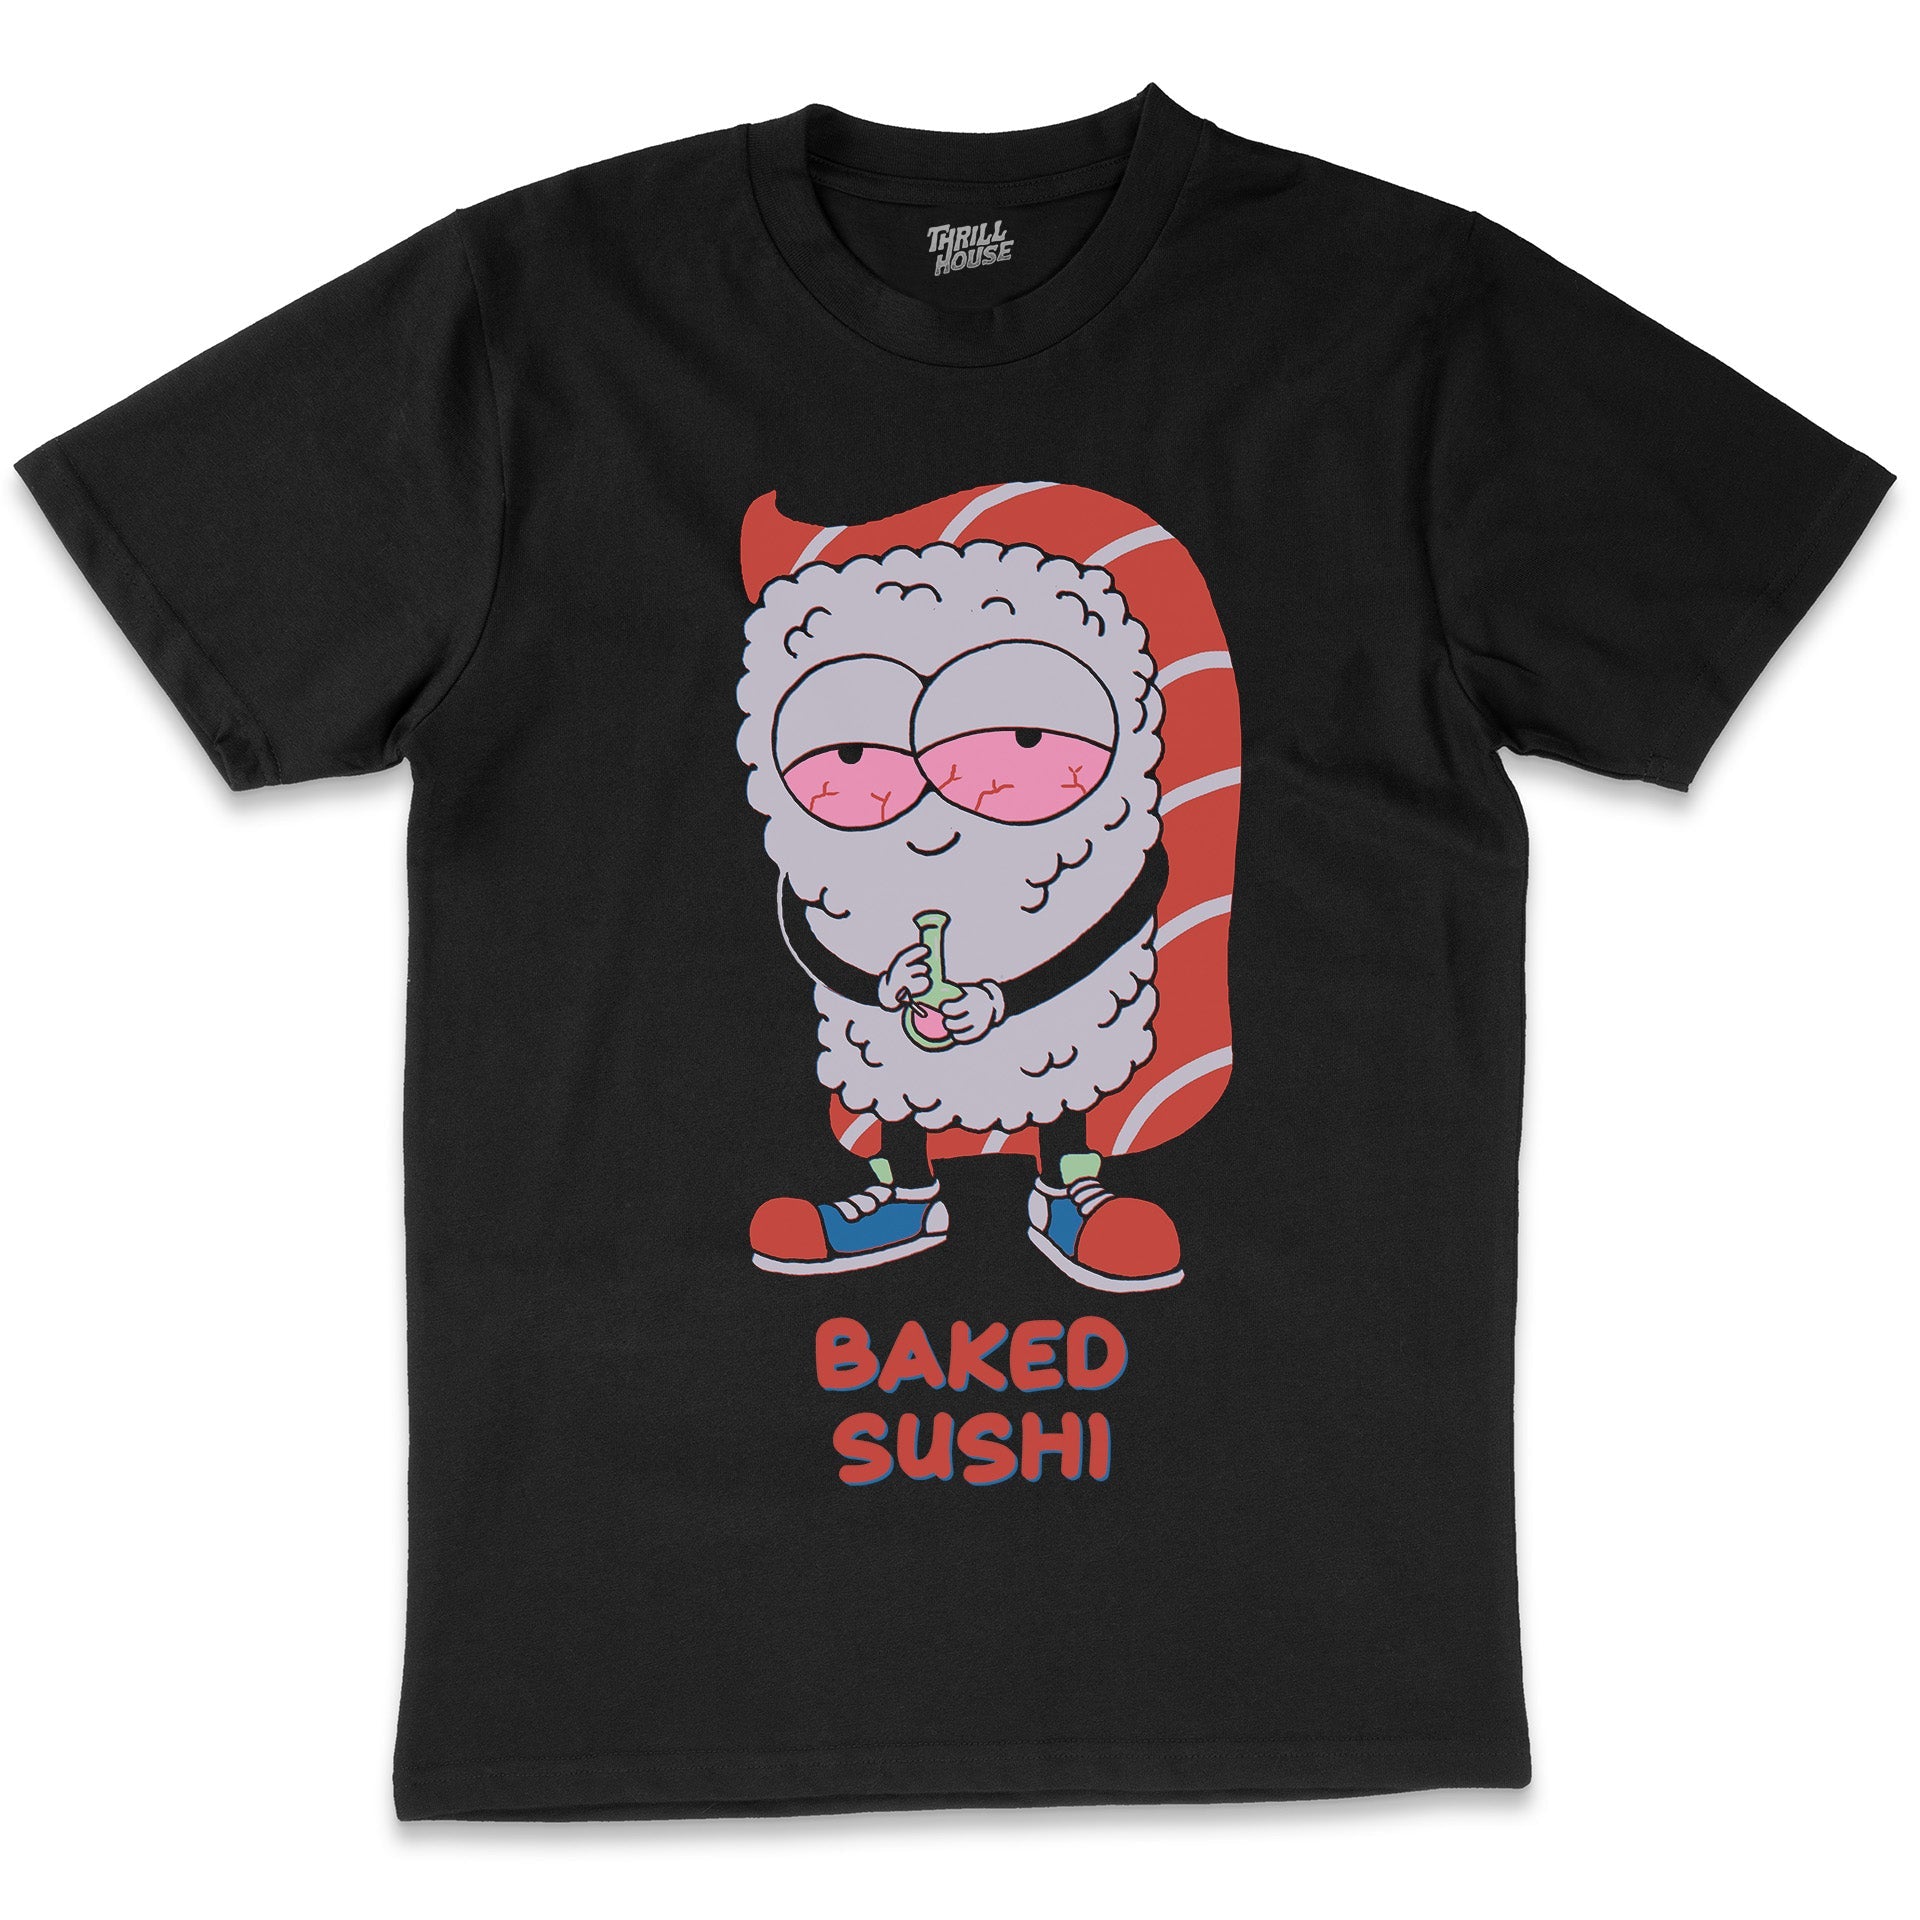 Baked Sushi Stoned Weed Funny Pot Humour Novelty Foodie Cotton T-Shirt